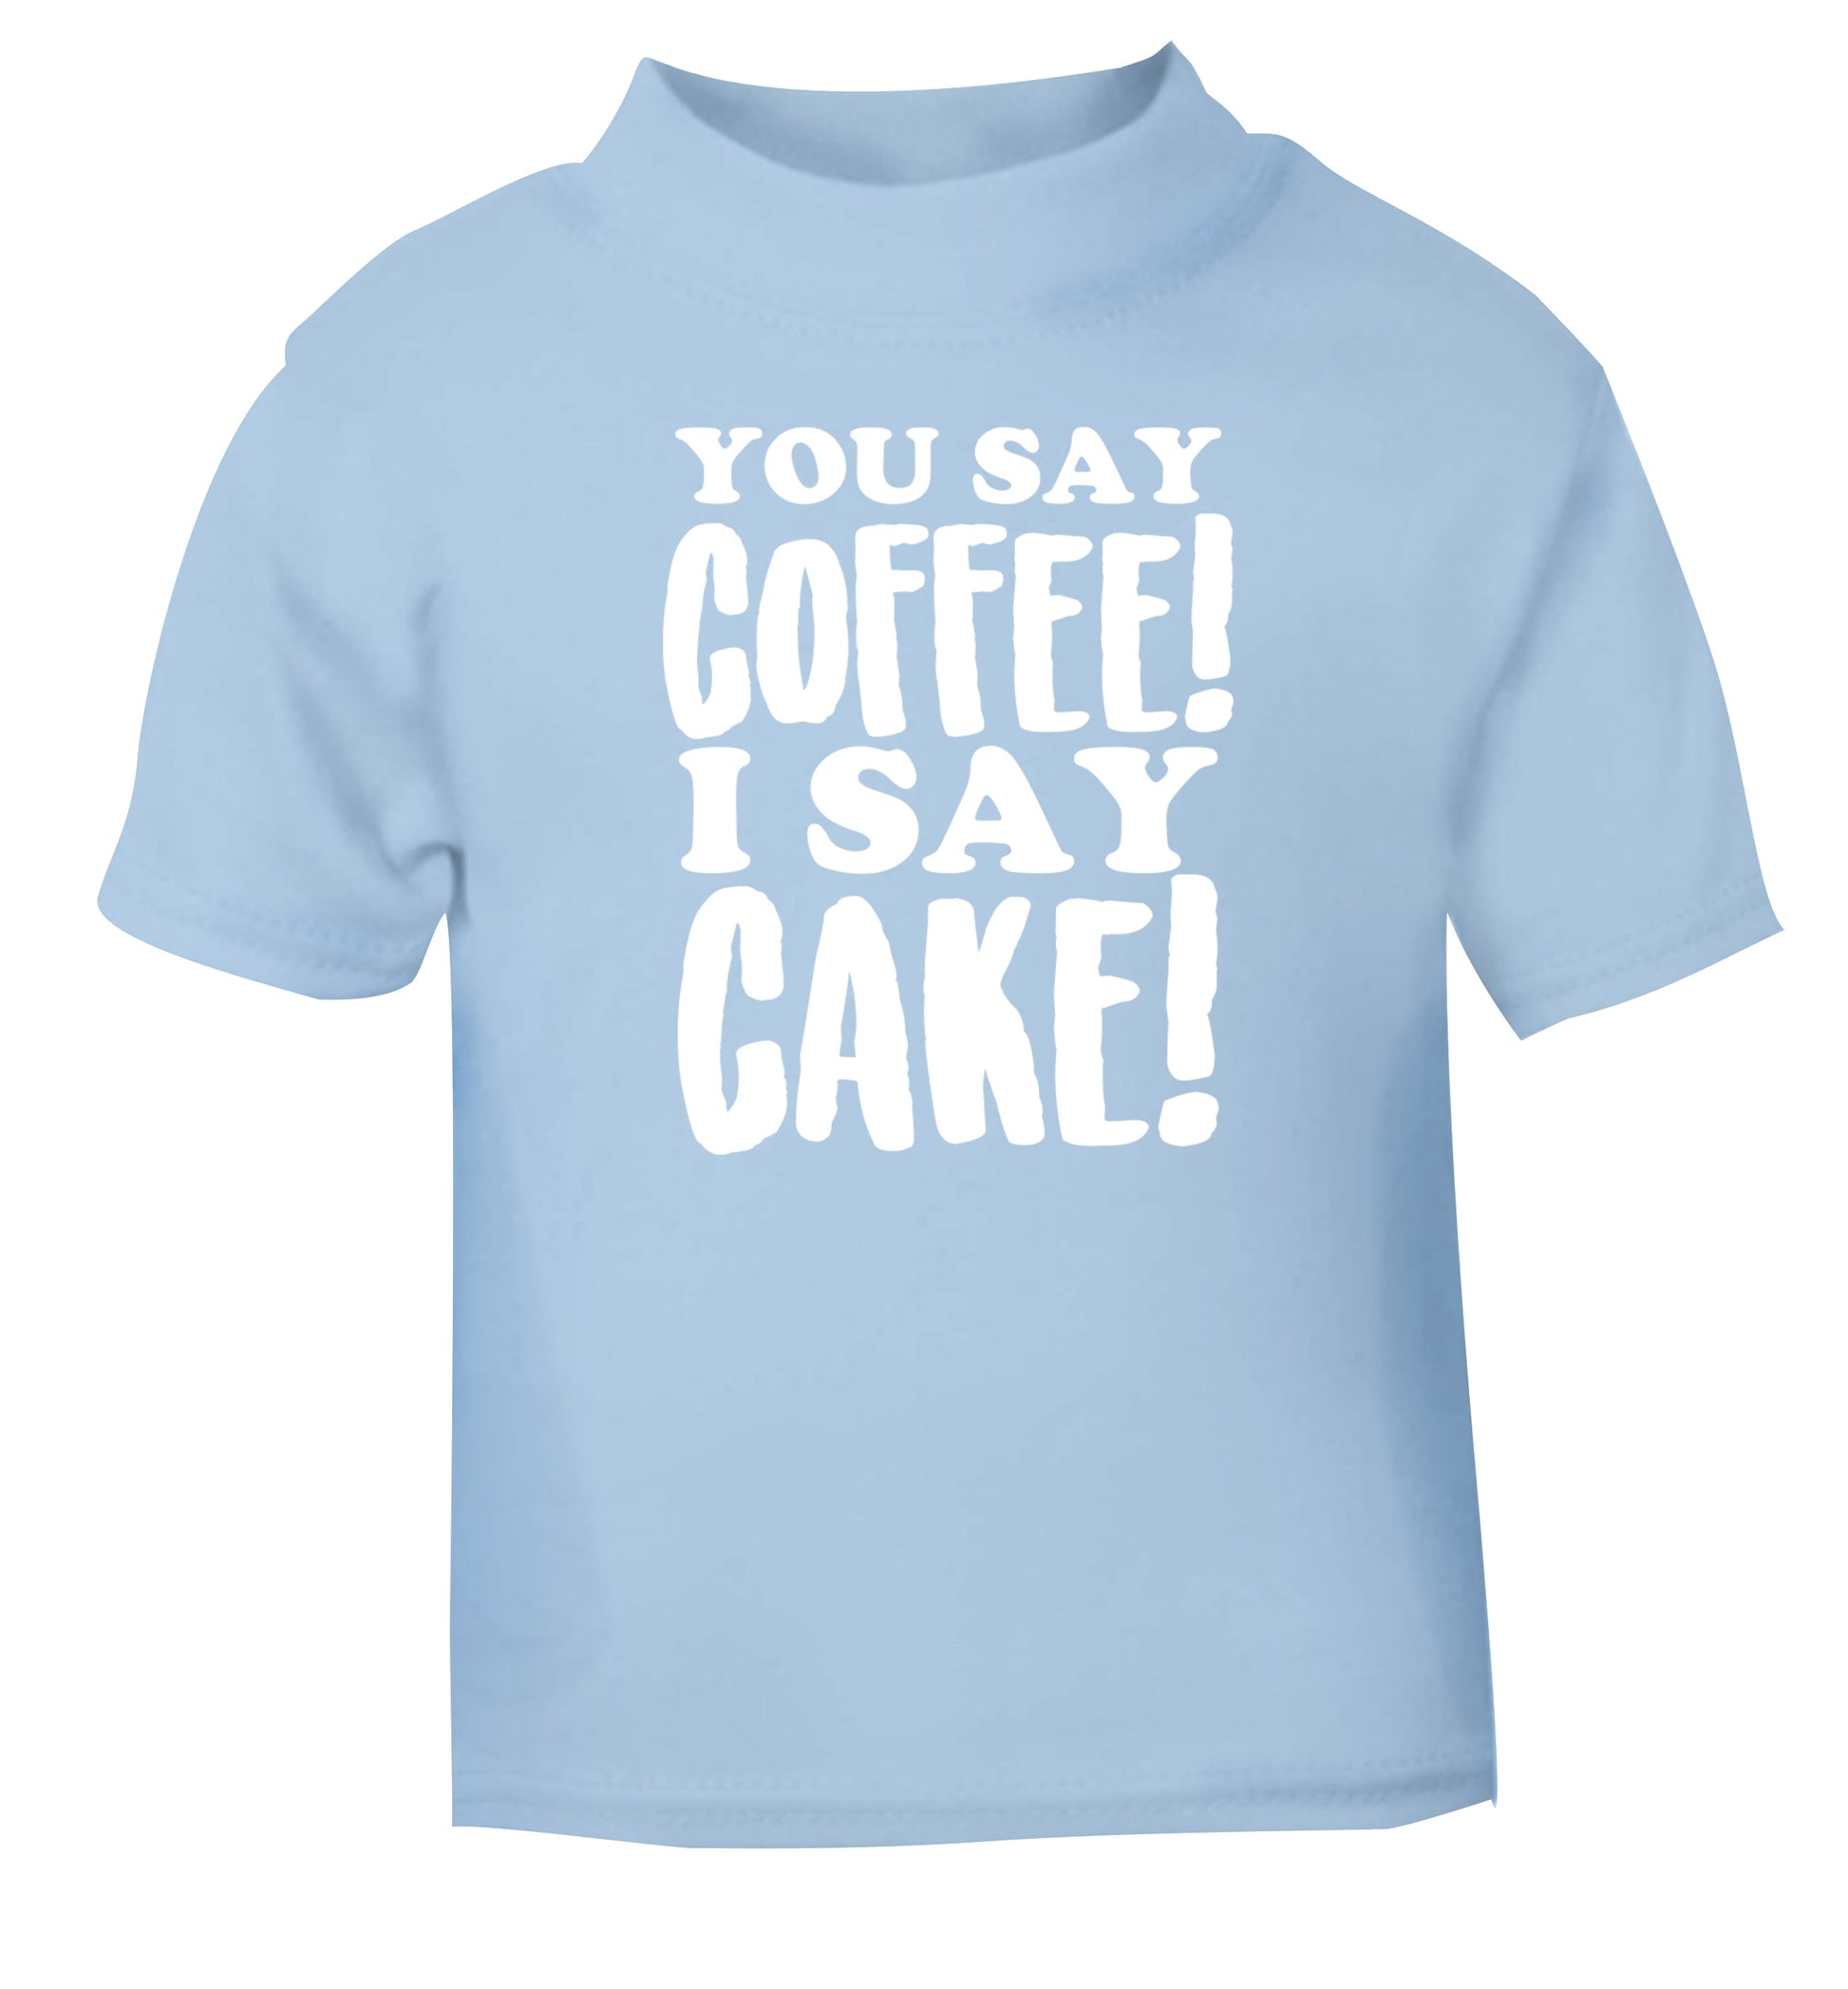 You say coffee I say cake! light blue Baby Toddler Tshirt 2 Years